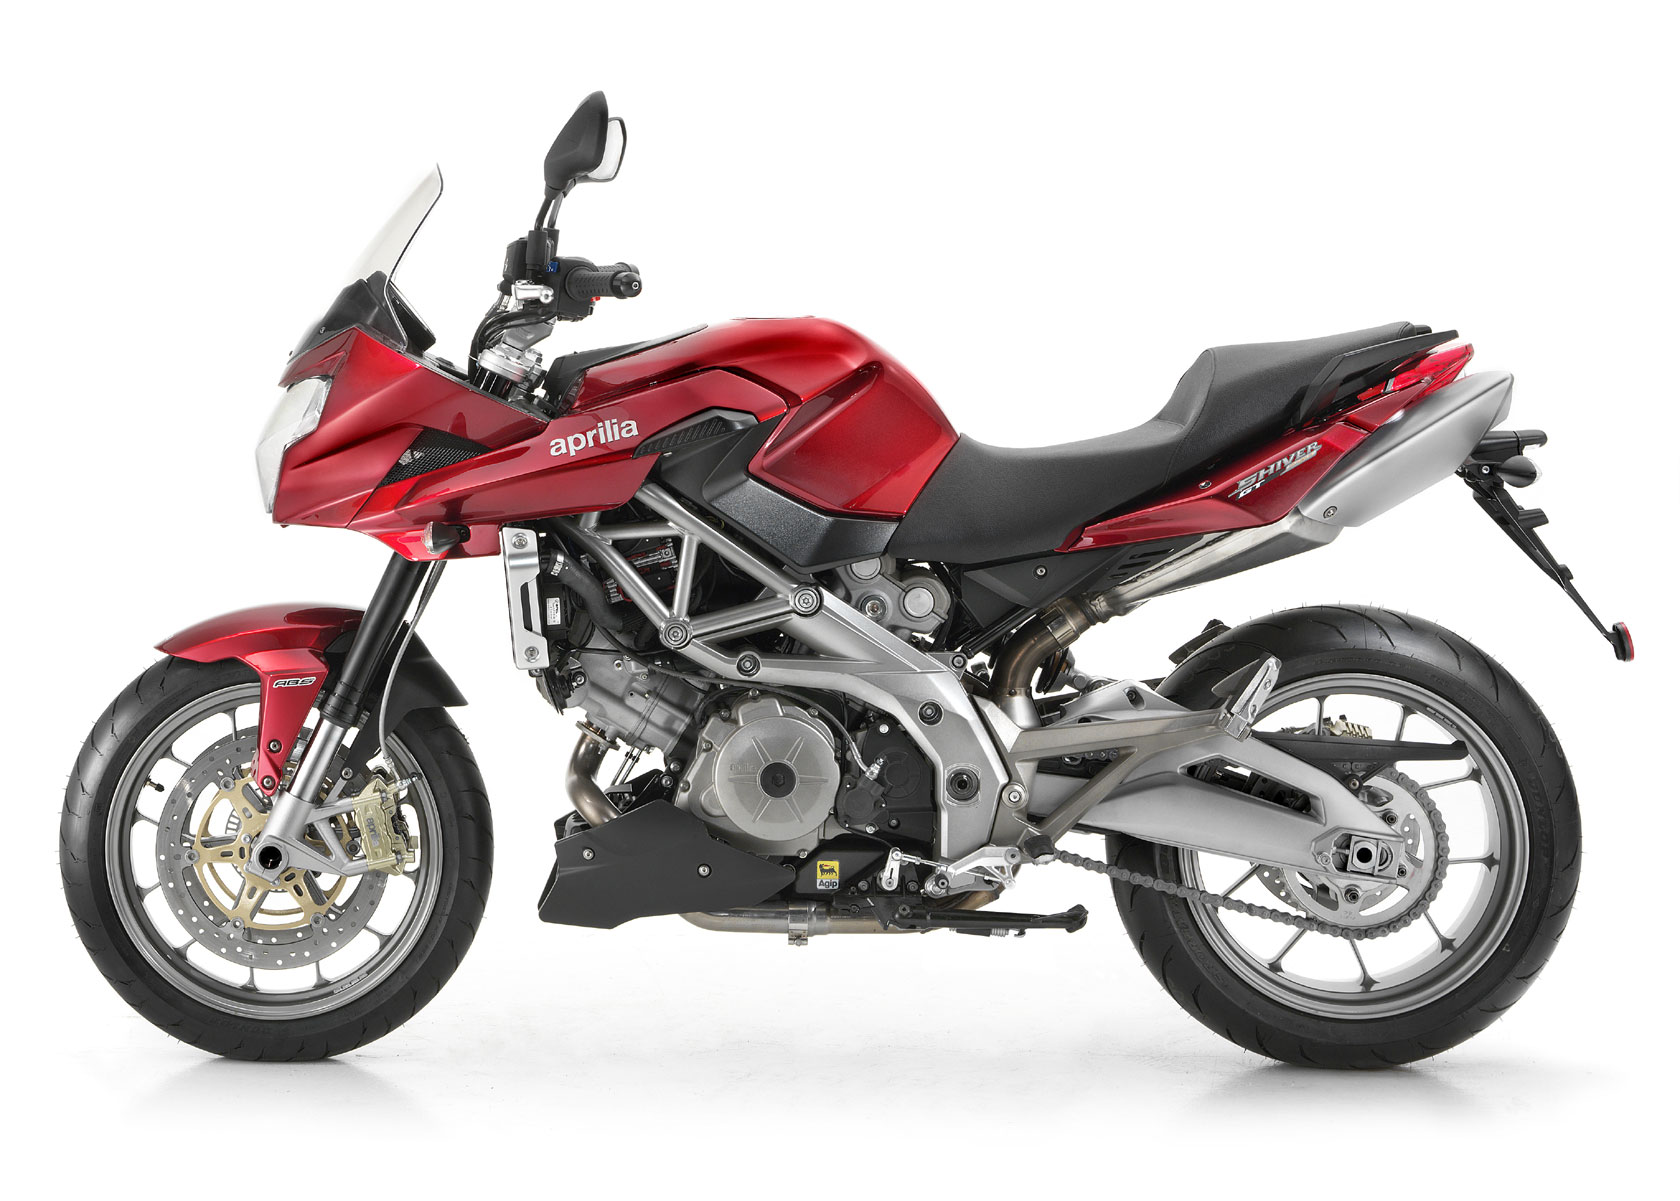 2015 APRILIA Shiver 750 Naked Bike New First Release With 